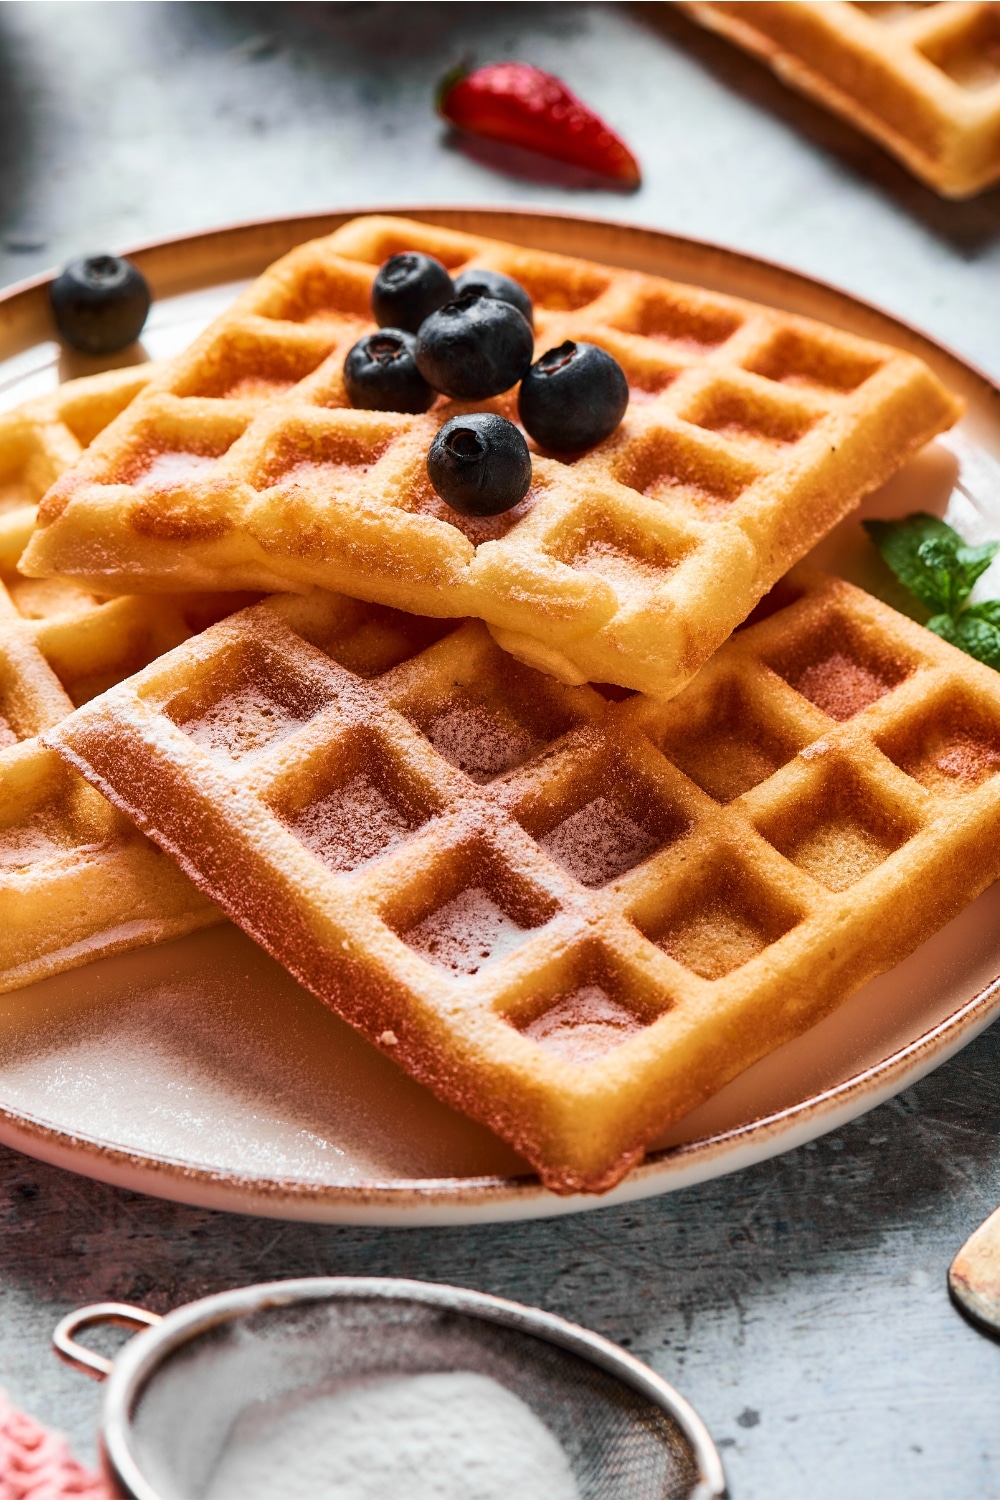 A waffle stacked on top of some more waffles on a plate.